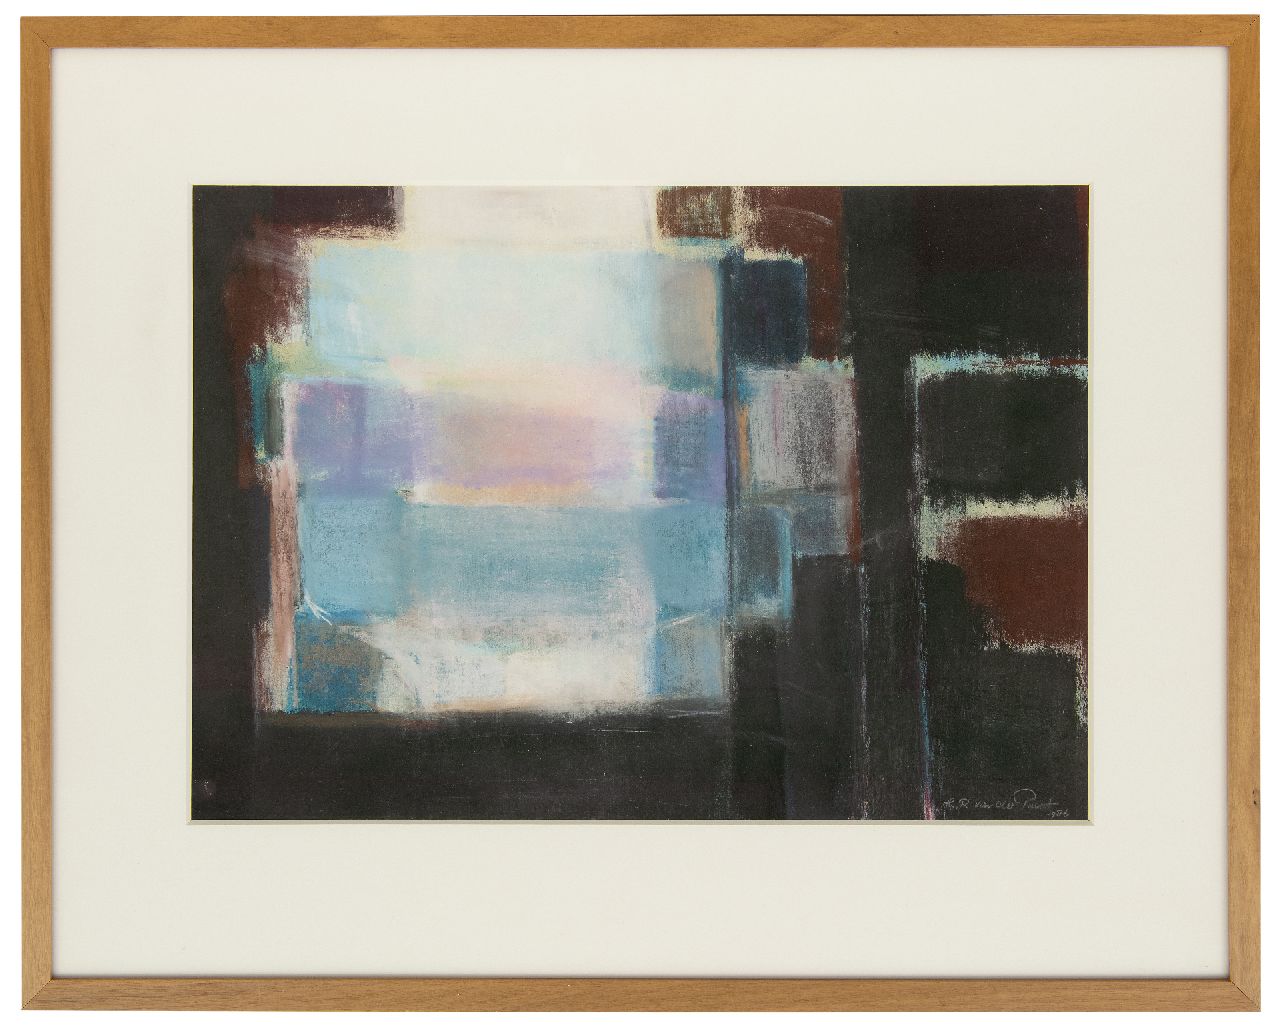 Pant T.R. van der | 'Théresia' Reiniera van der Pant | Watercolours and drawings offered for sale | View, pastel on paper 35.9 x 51.0 cm, signed l.r. and dated 1986